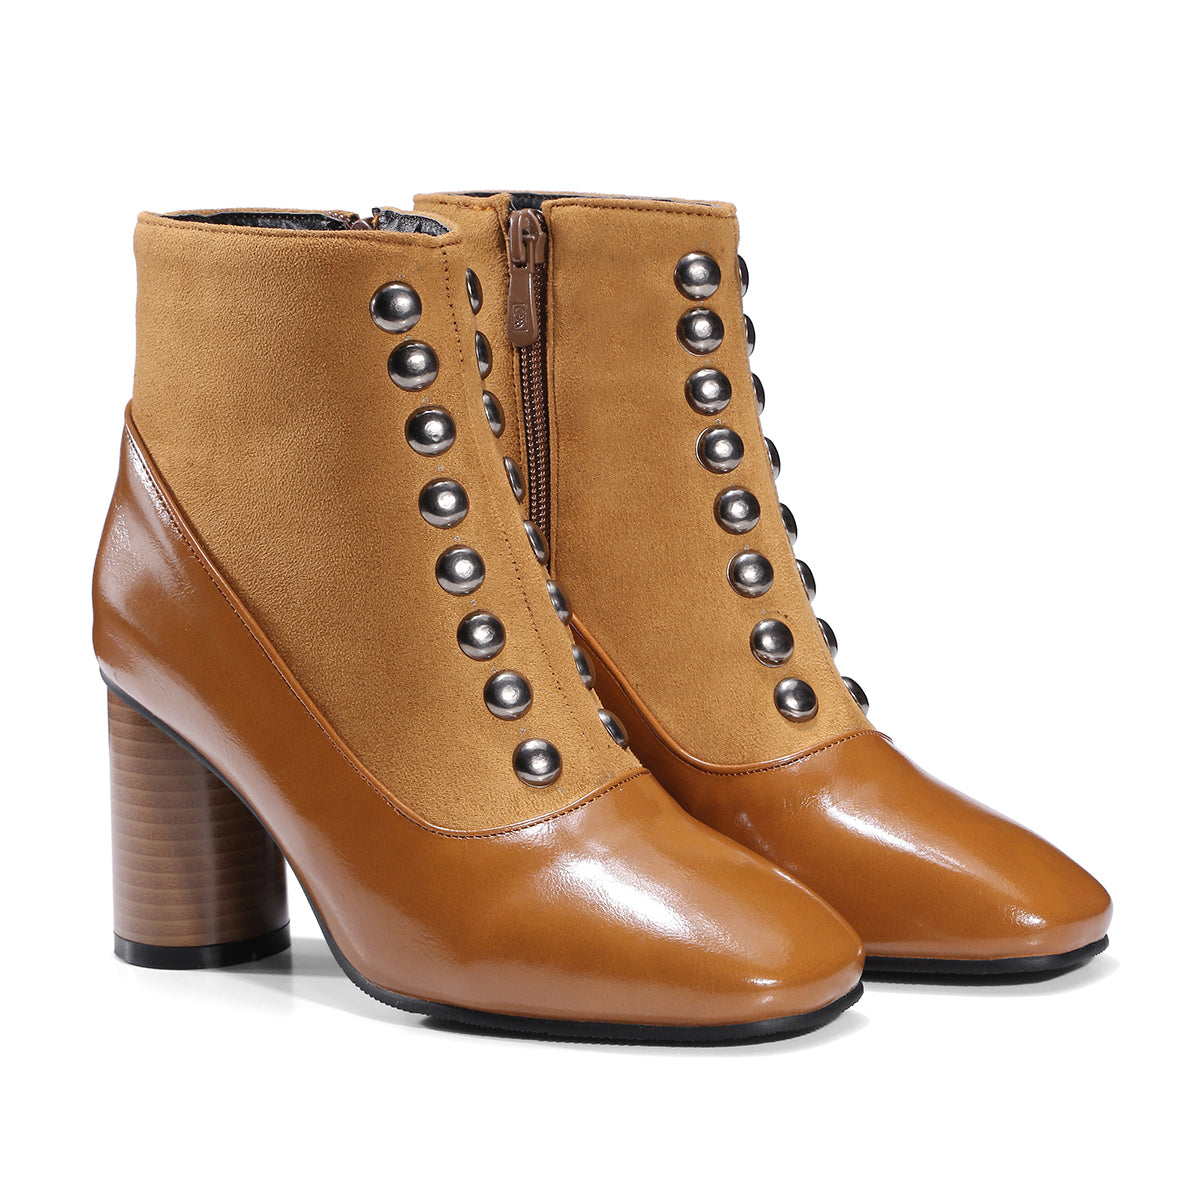 Bigsizeheels Square head rivet coloured ankle boots - Brown freeshipping - bigsizeheel®-size5-size15 -All Plus Sizes Available!